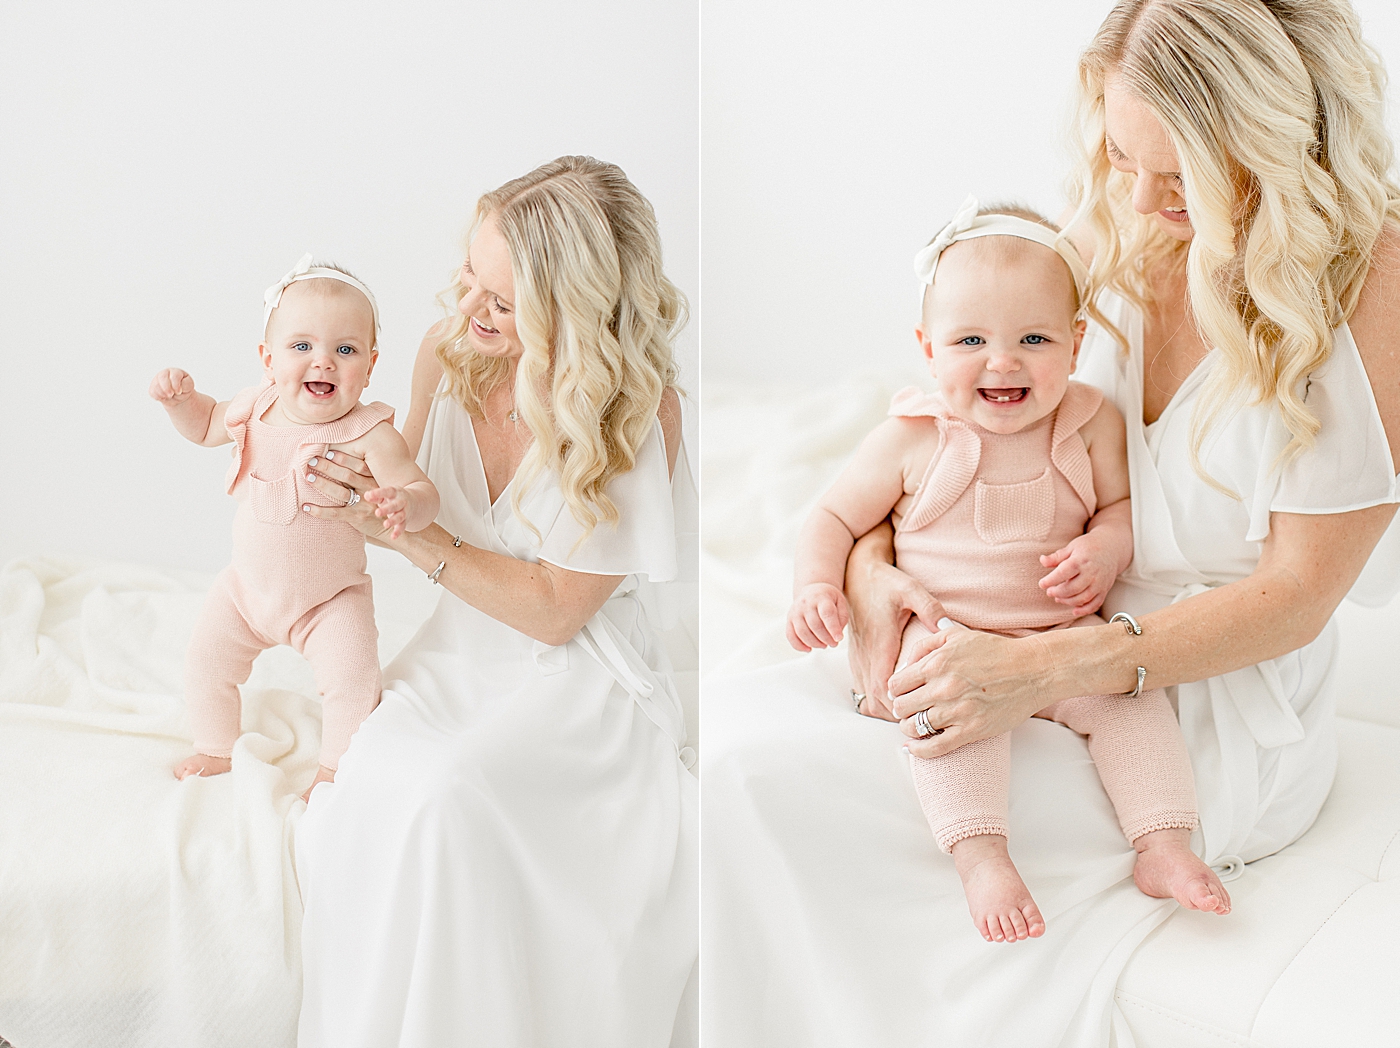 Mom sitting and playing with nine month old baby girl. Photo by Brittany Elise Photography.